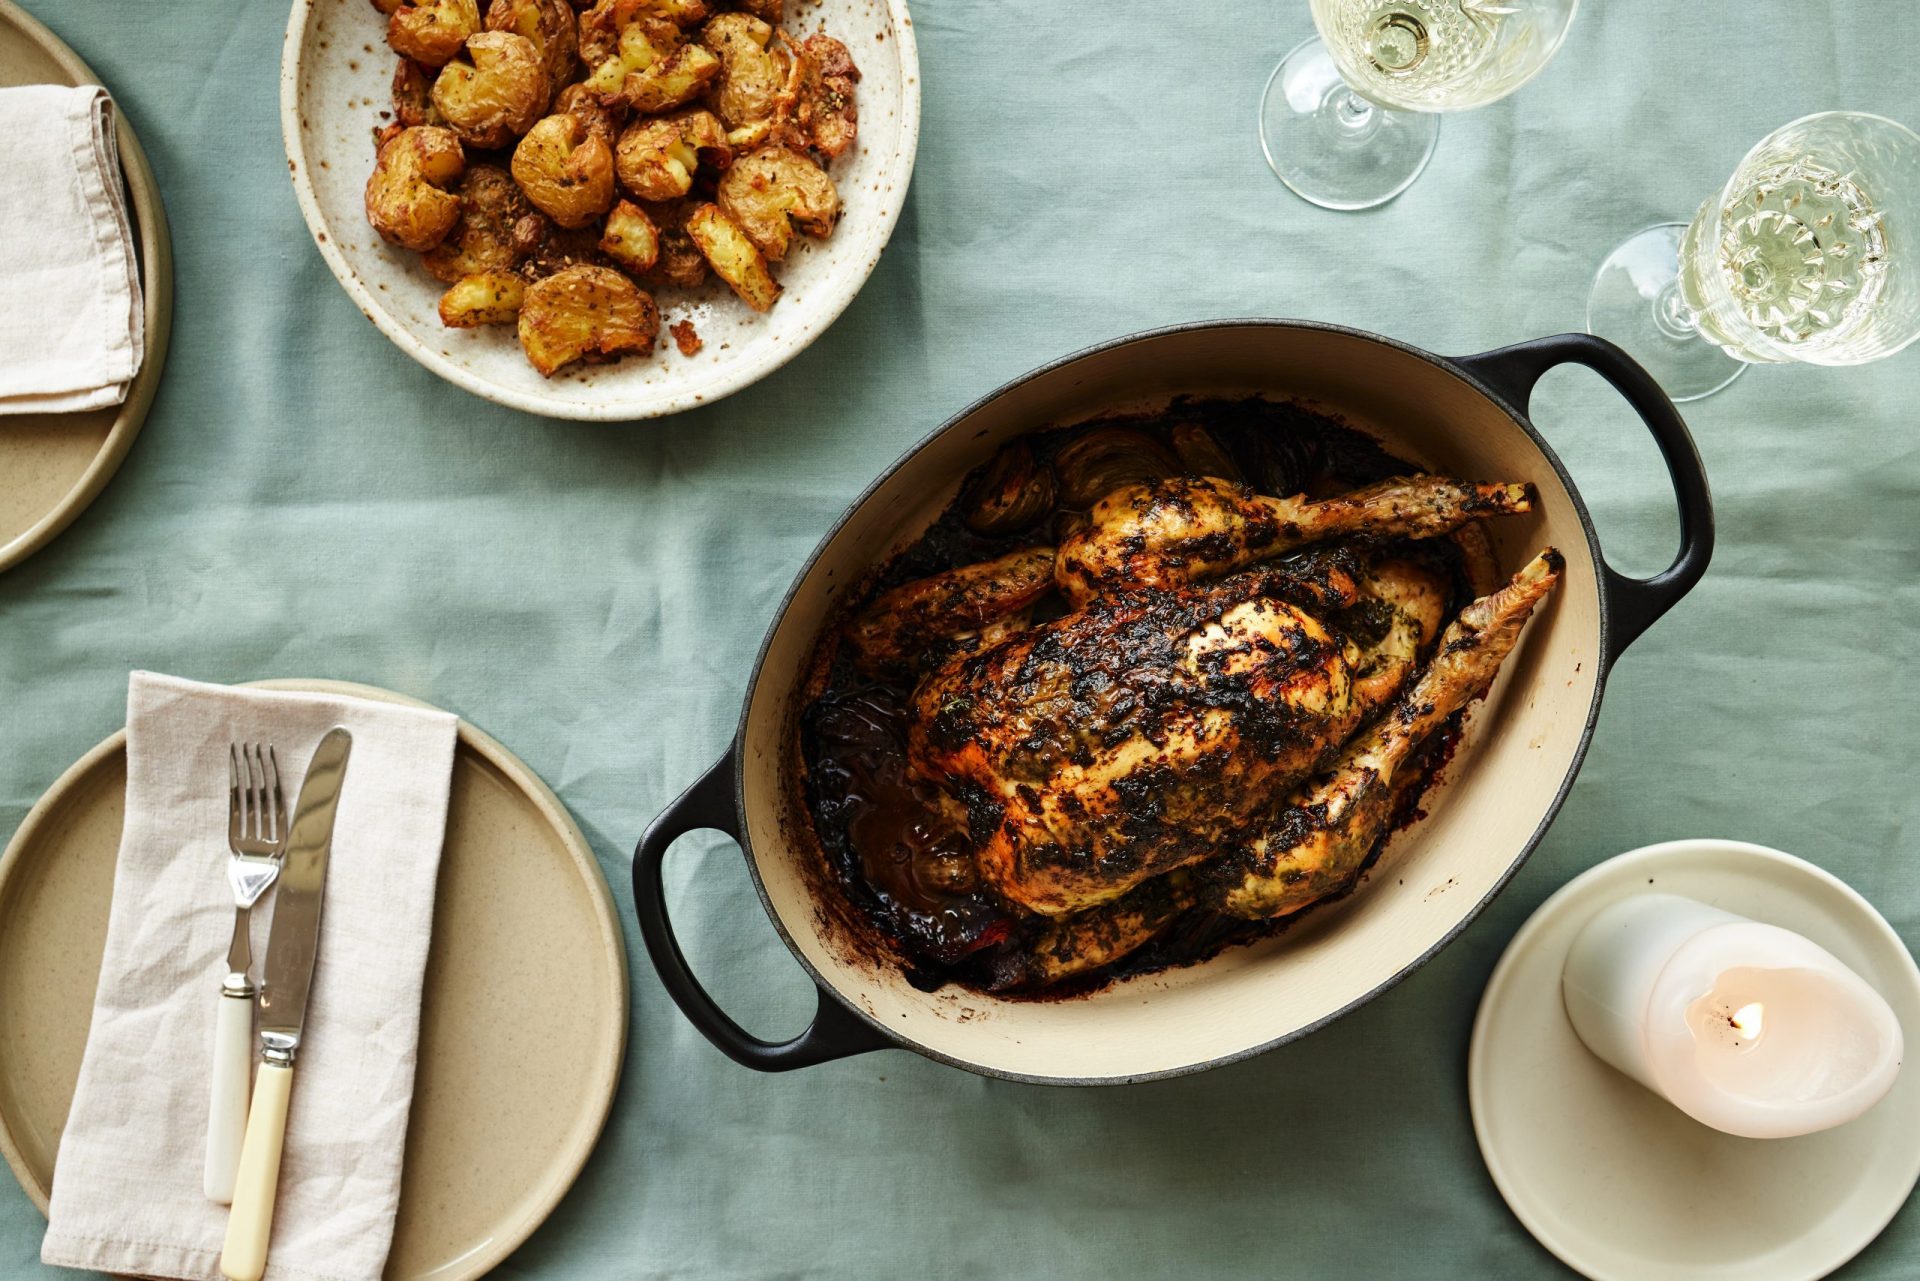 Safia Shakarchi of Another Pantry's herby olive oil roast chicken recipe